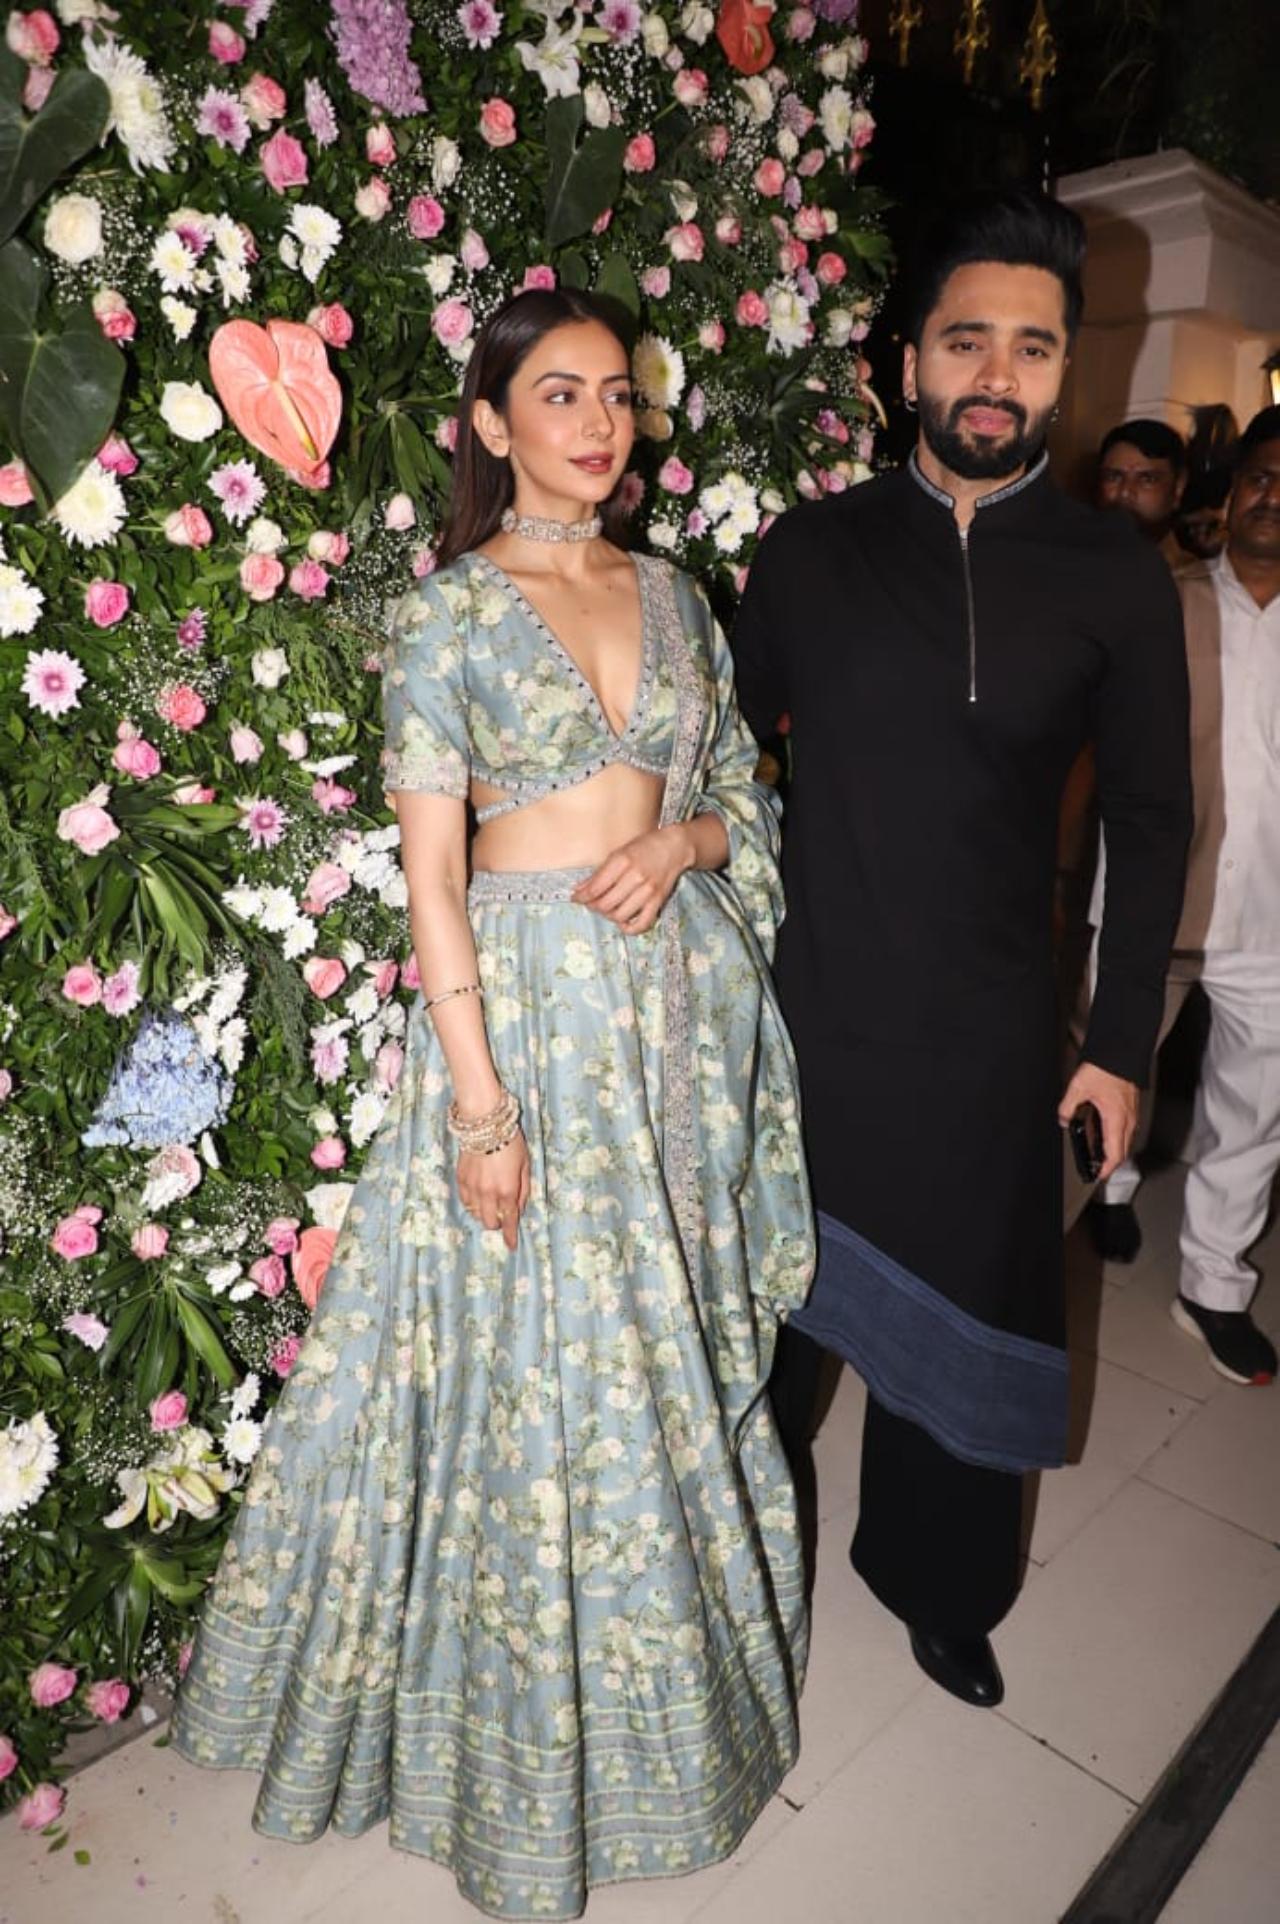 Rakul Preet Singh and Jackky Bhagnani were also seen together at the party. While Rakul opted for a pastel coloured lehenga, Jackky looked dapper in a black kurta suit